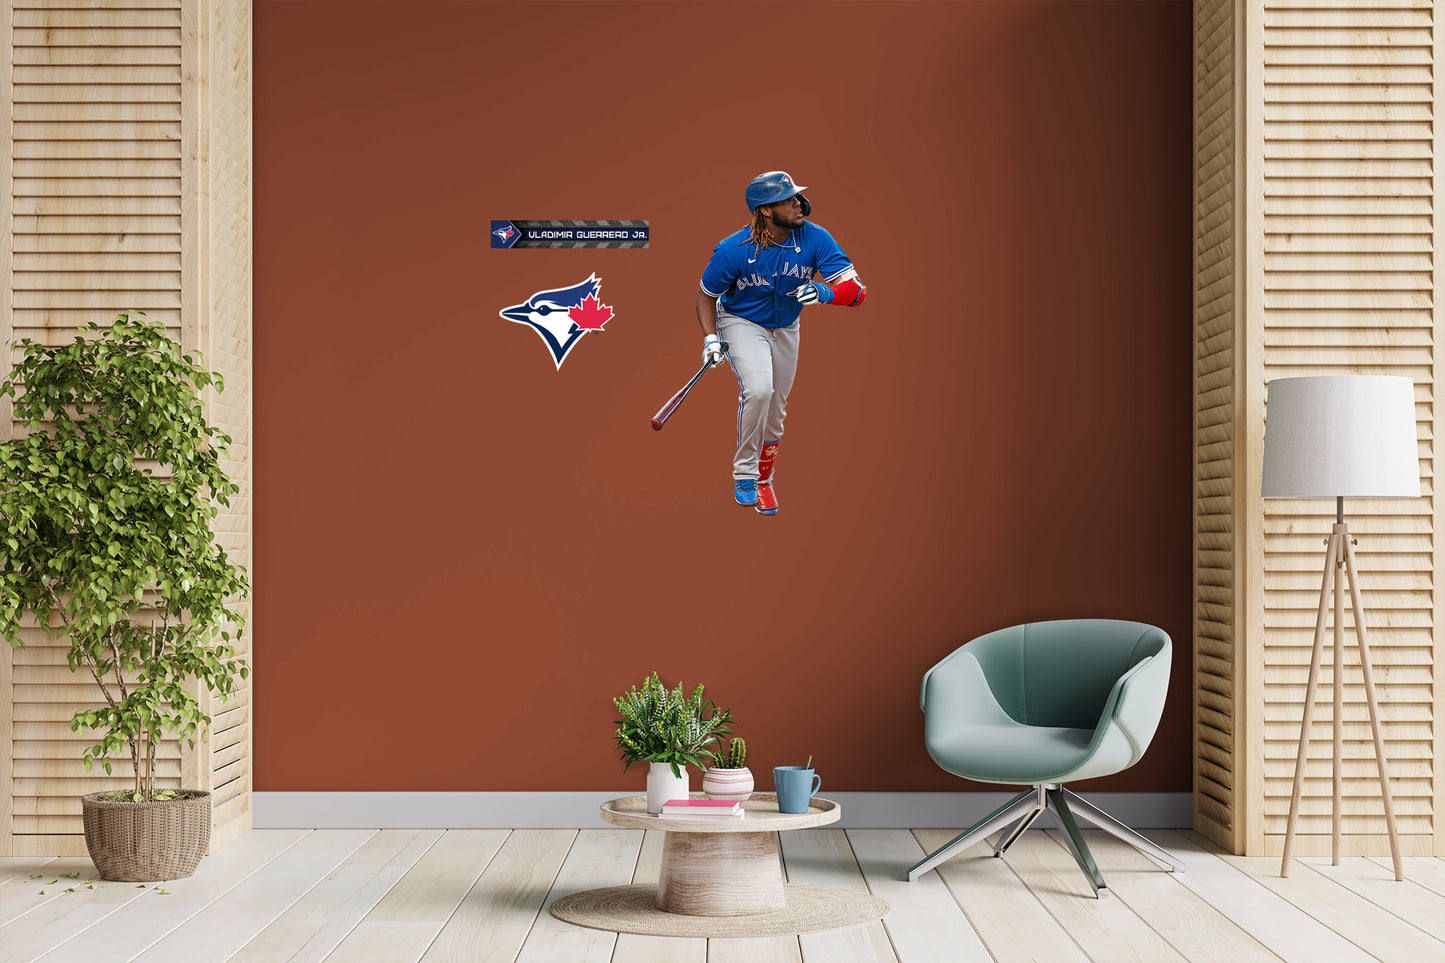 Toronto Blue Jays: Vladimir Guerrero Jr.         - Officially Licensed MLB Removable Wall   Adhesive Decal